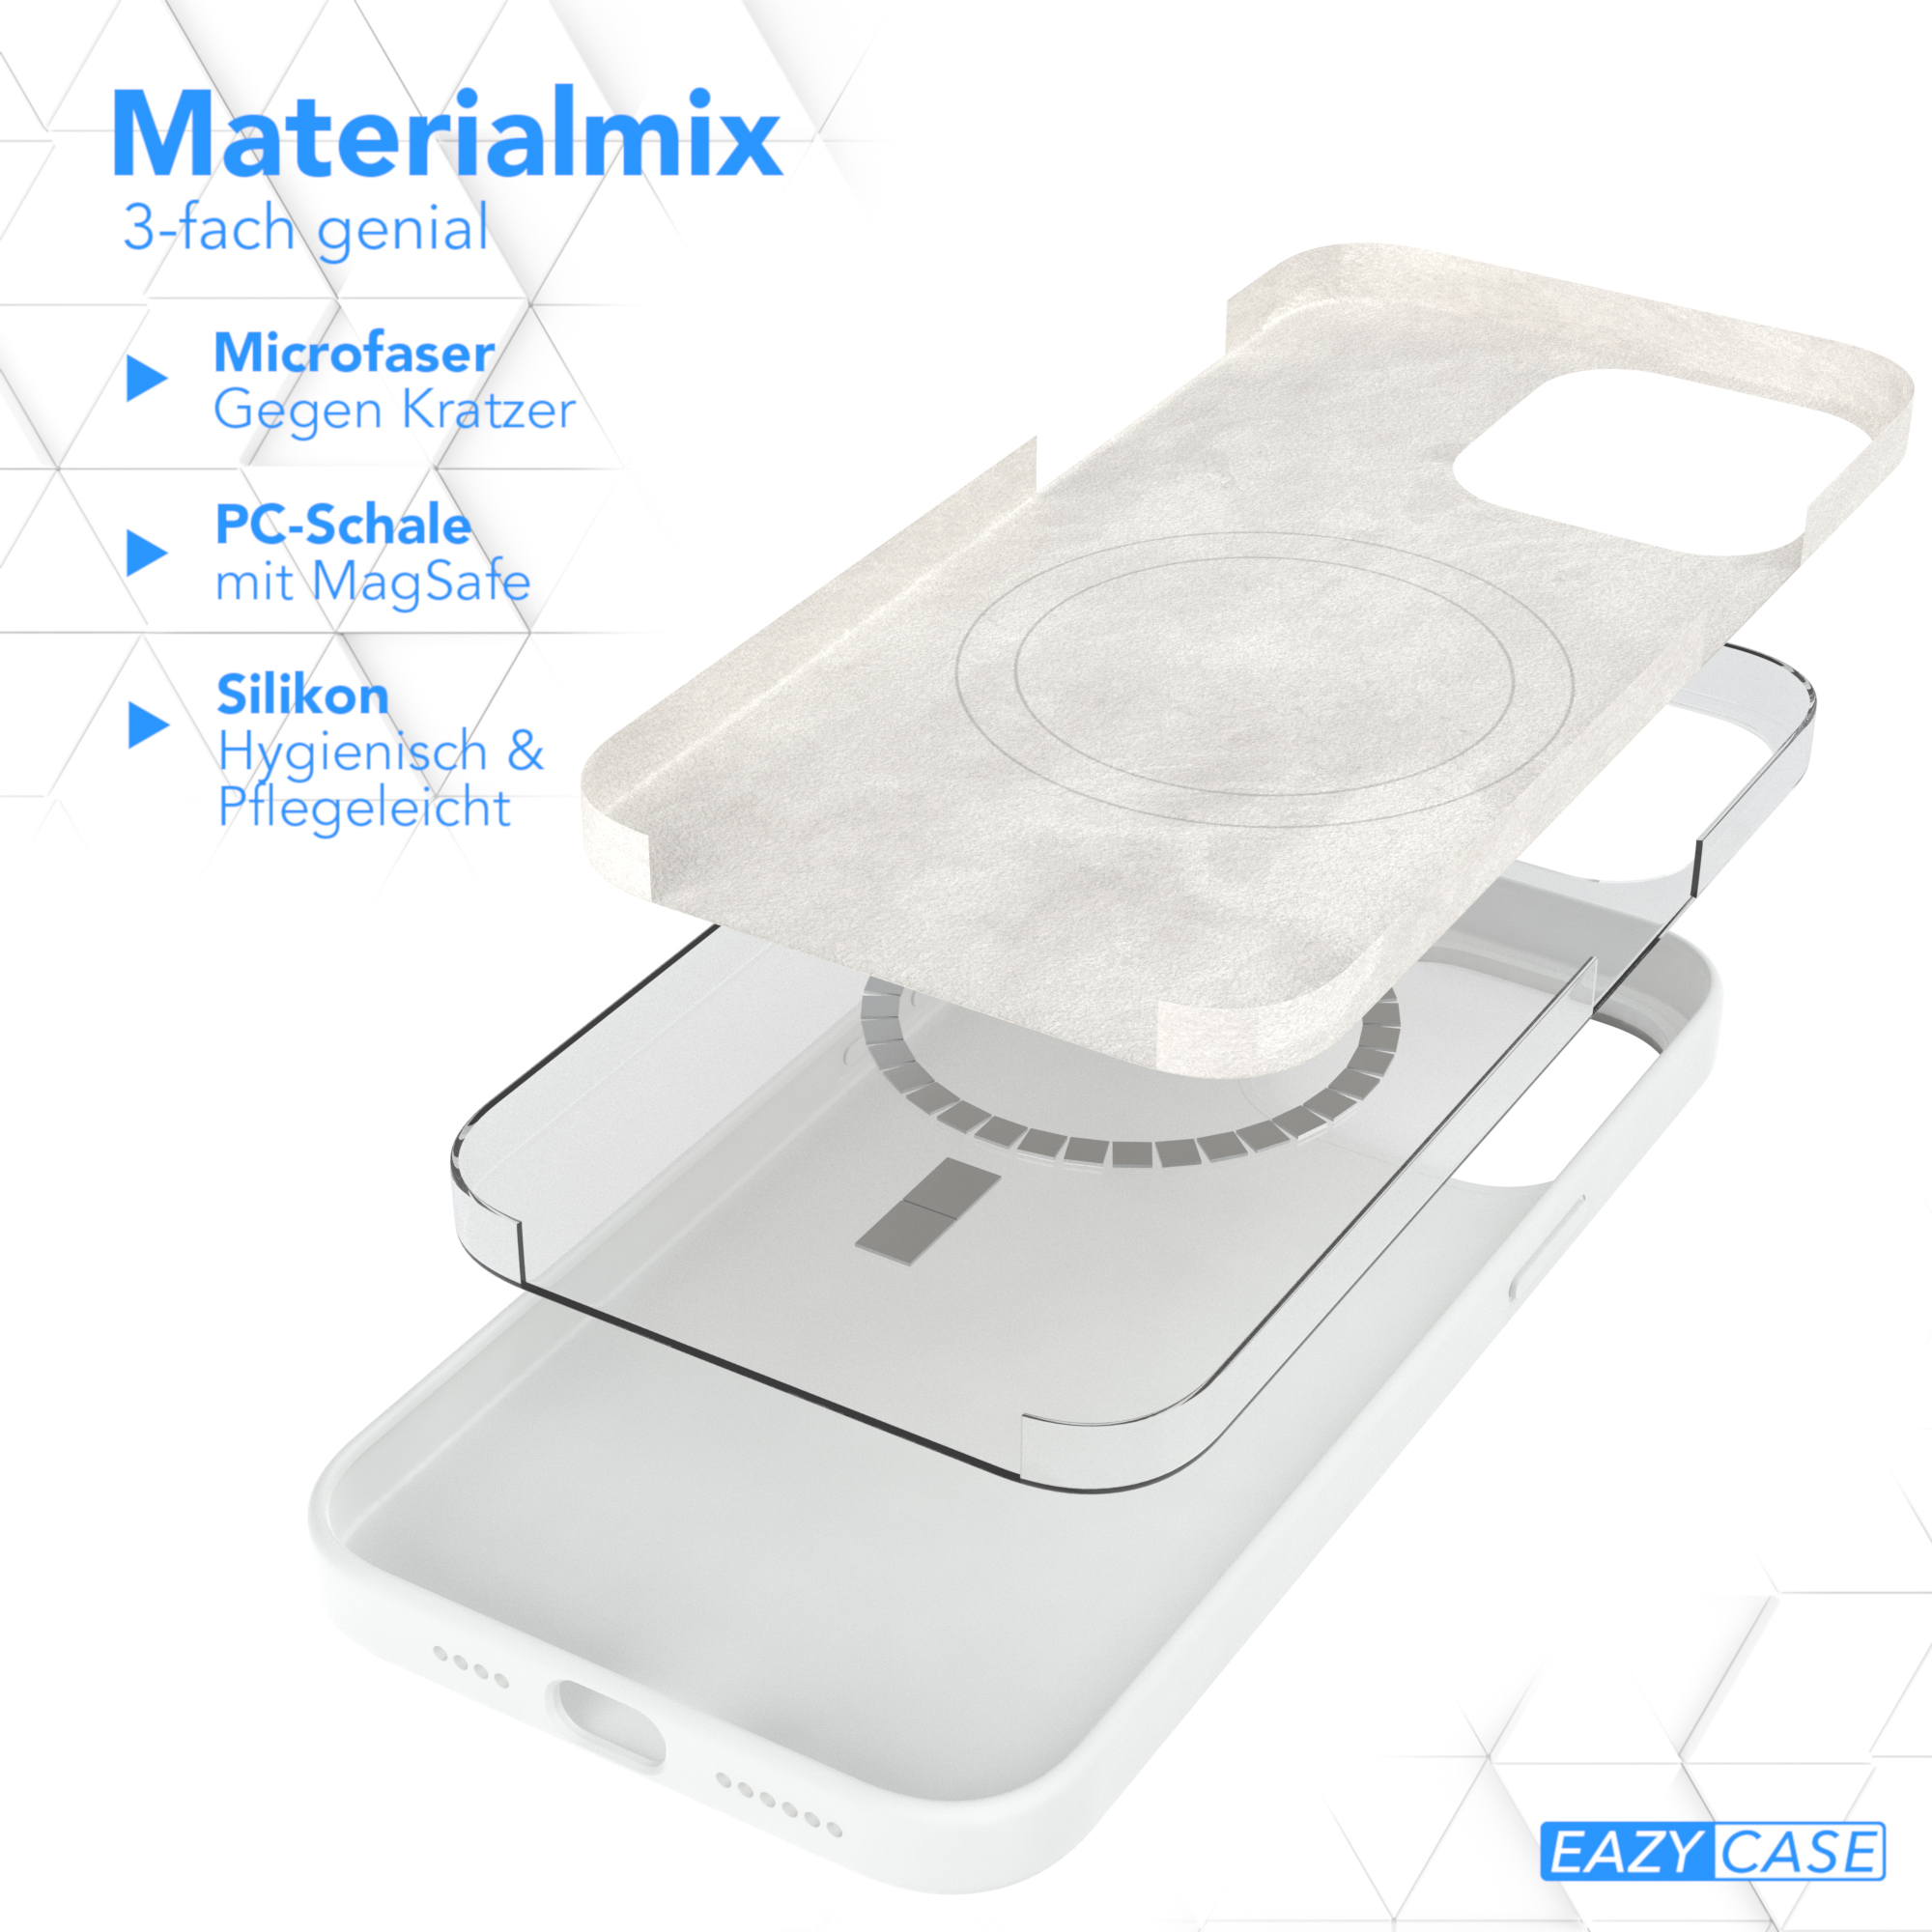 CASE mit Handycase Weiß Max, Pro iPhone Apple, MagSafe, Backcover, EAZY Premium 14 Silikon